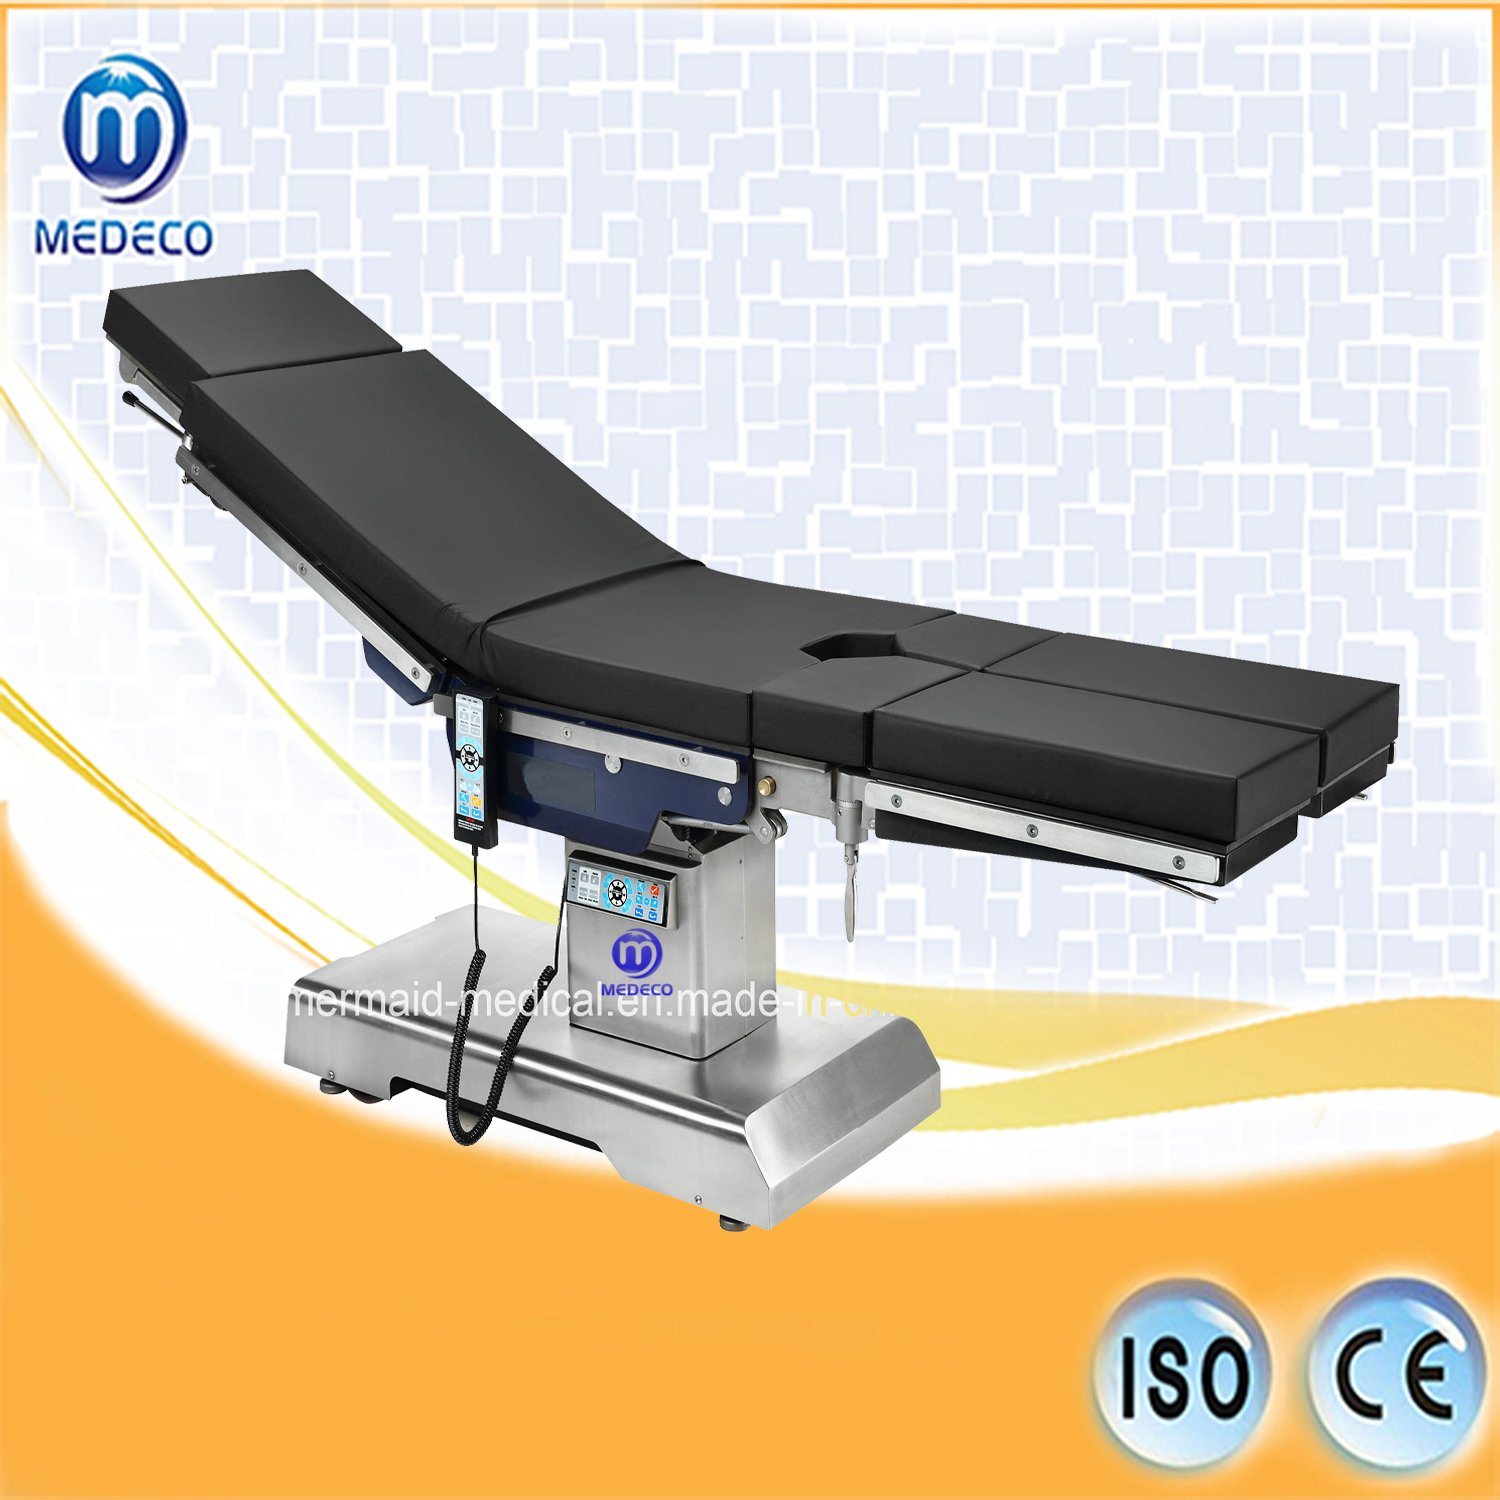 Hospital Surgical Equipment Table Dt-12e (S)